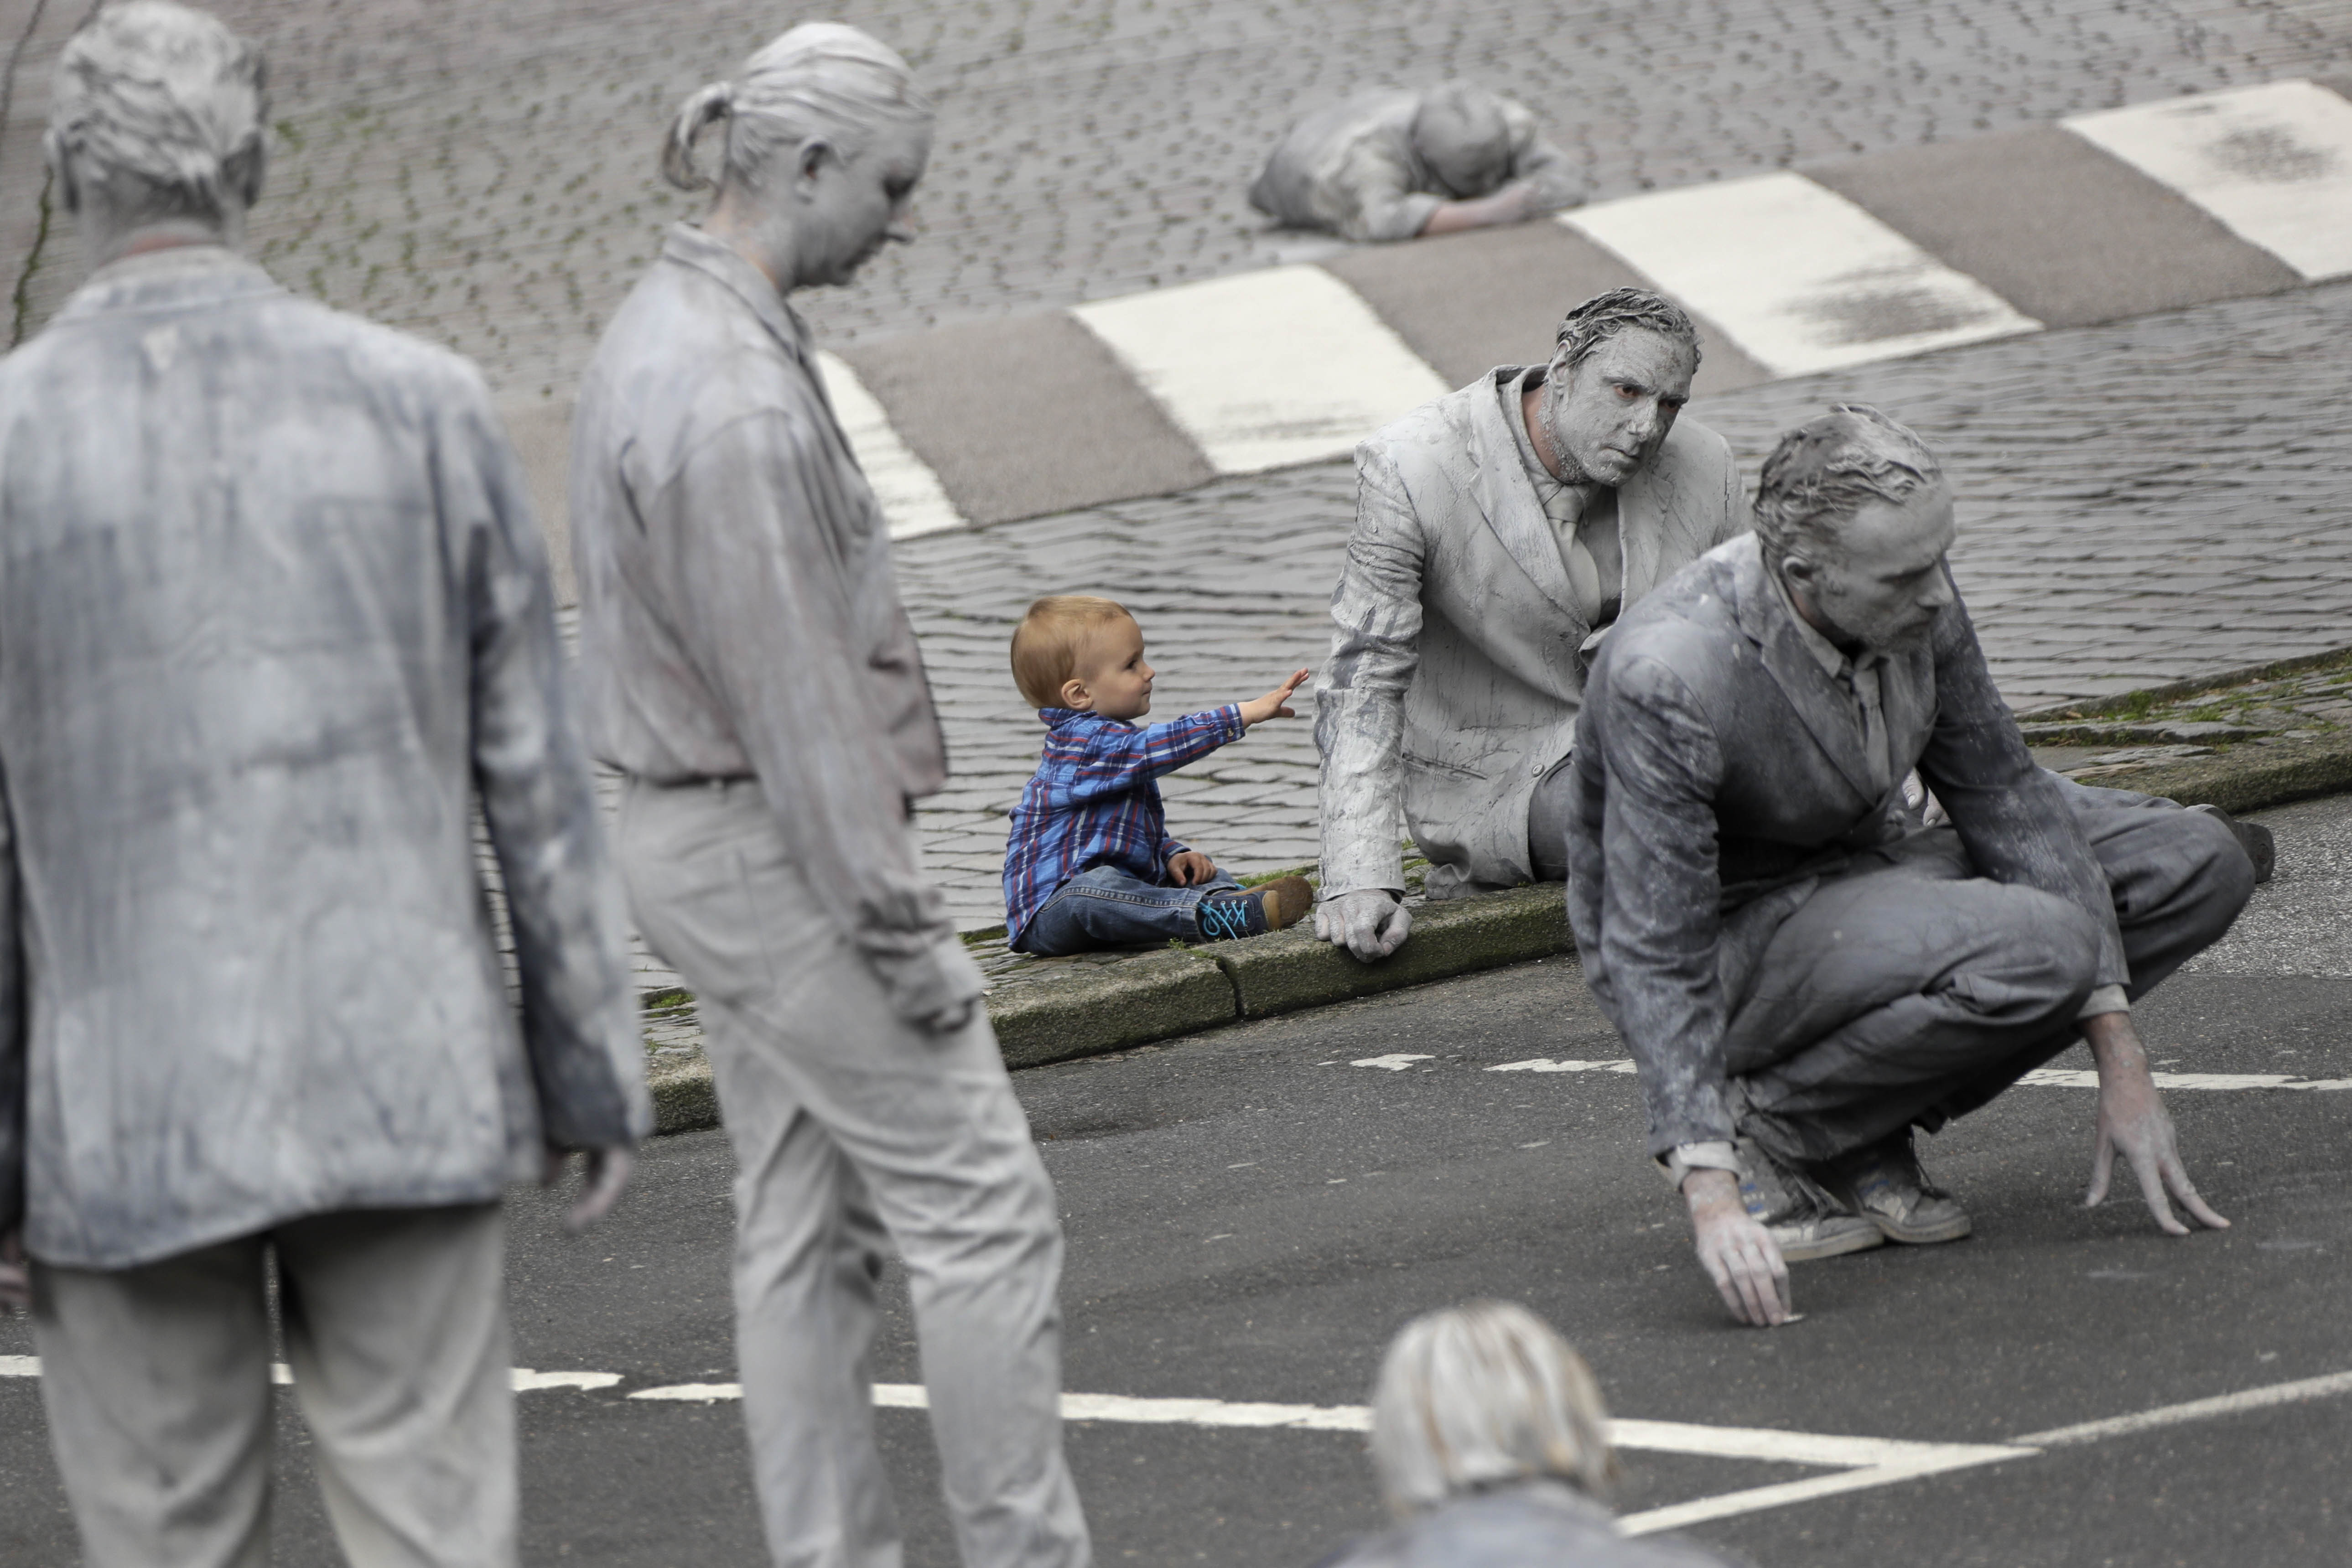 A small boy touches a participants of the performance '1000 GESTALTEN' with hundreds of people painted like clay figures moving slowly and silently through the streets of Hamburg to protest against the G-20 summit in Hamburg, northern Germany, Wednesday, July 5, 2017. The leaders of the group of 20 meet July 7 and 8. (AP Photo/Matthias Schrader)